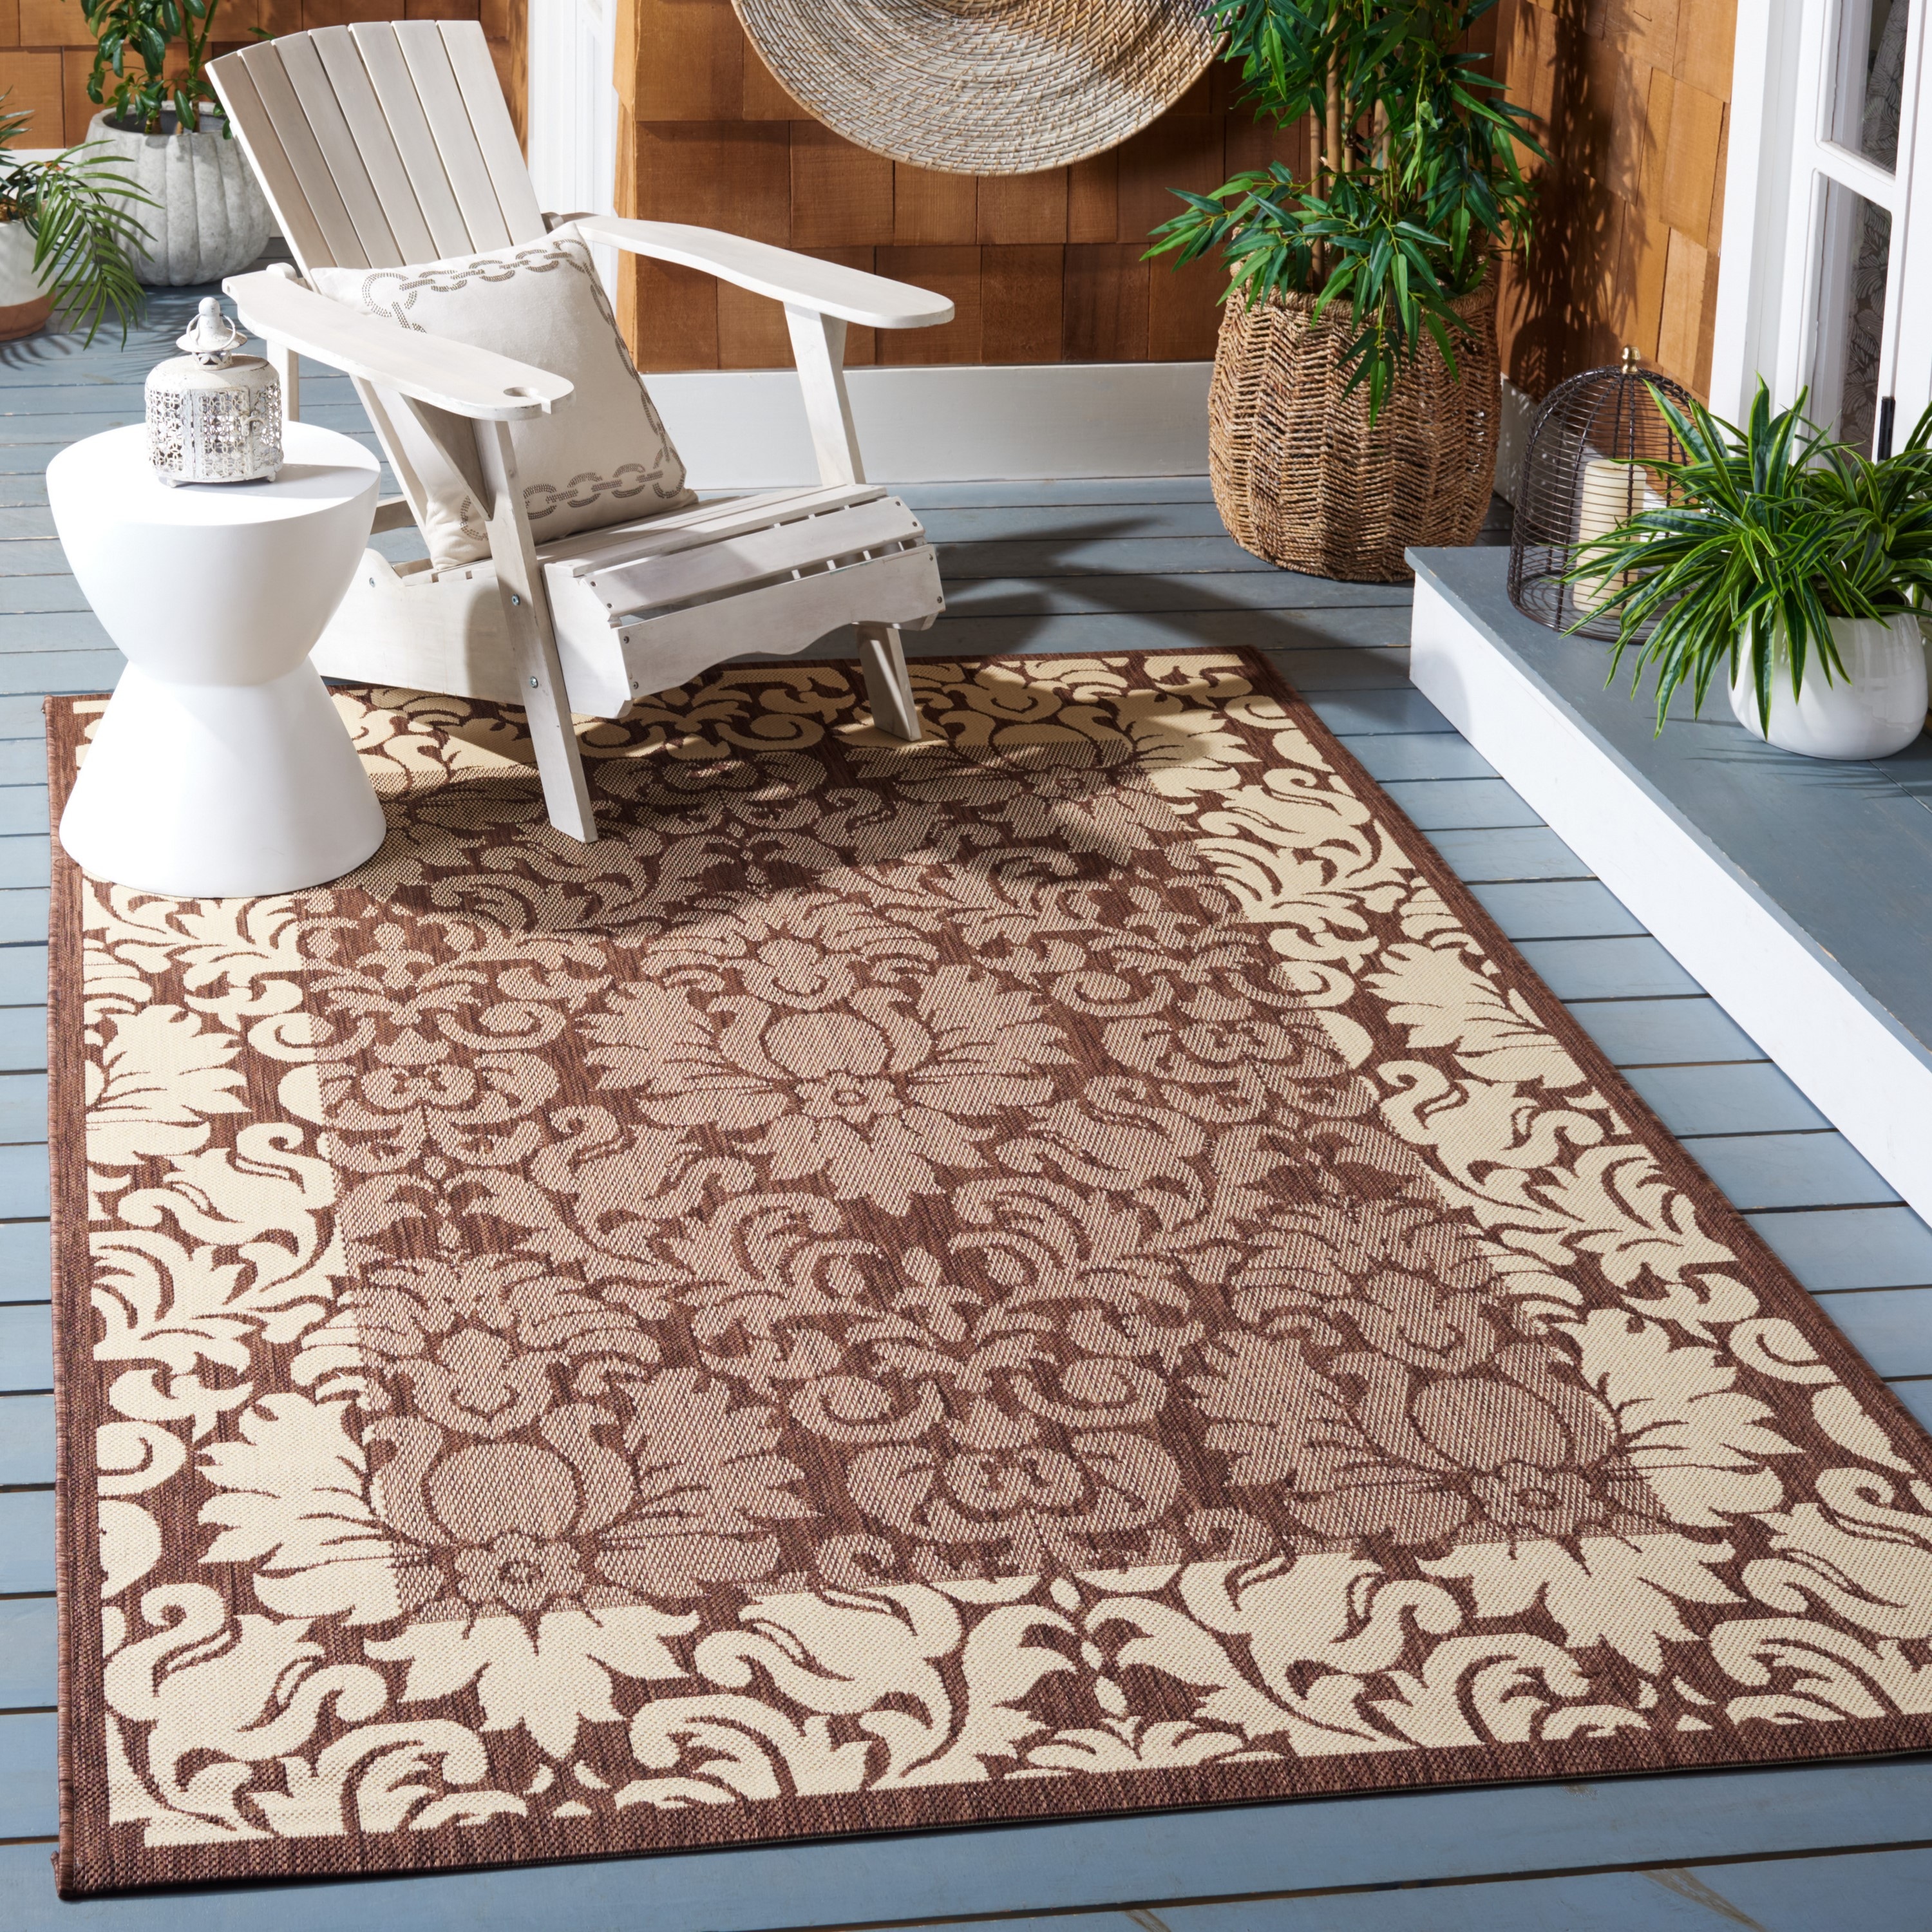 Maltese Sand Sand Tan White 2 ft. 3 in. x 1 ft. 5 in. Small Mat Washable  Floor Mat Area Rug